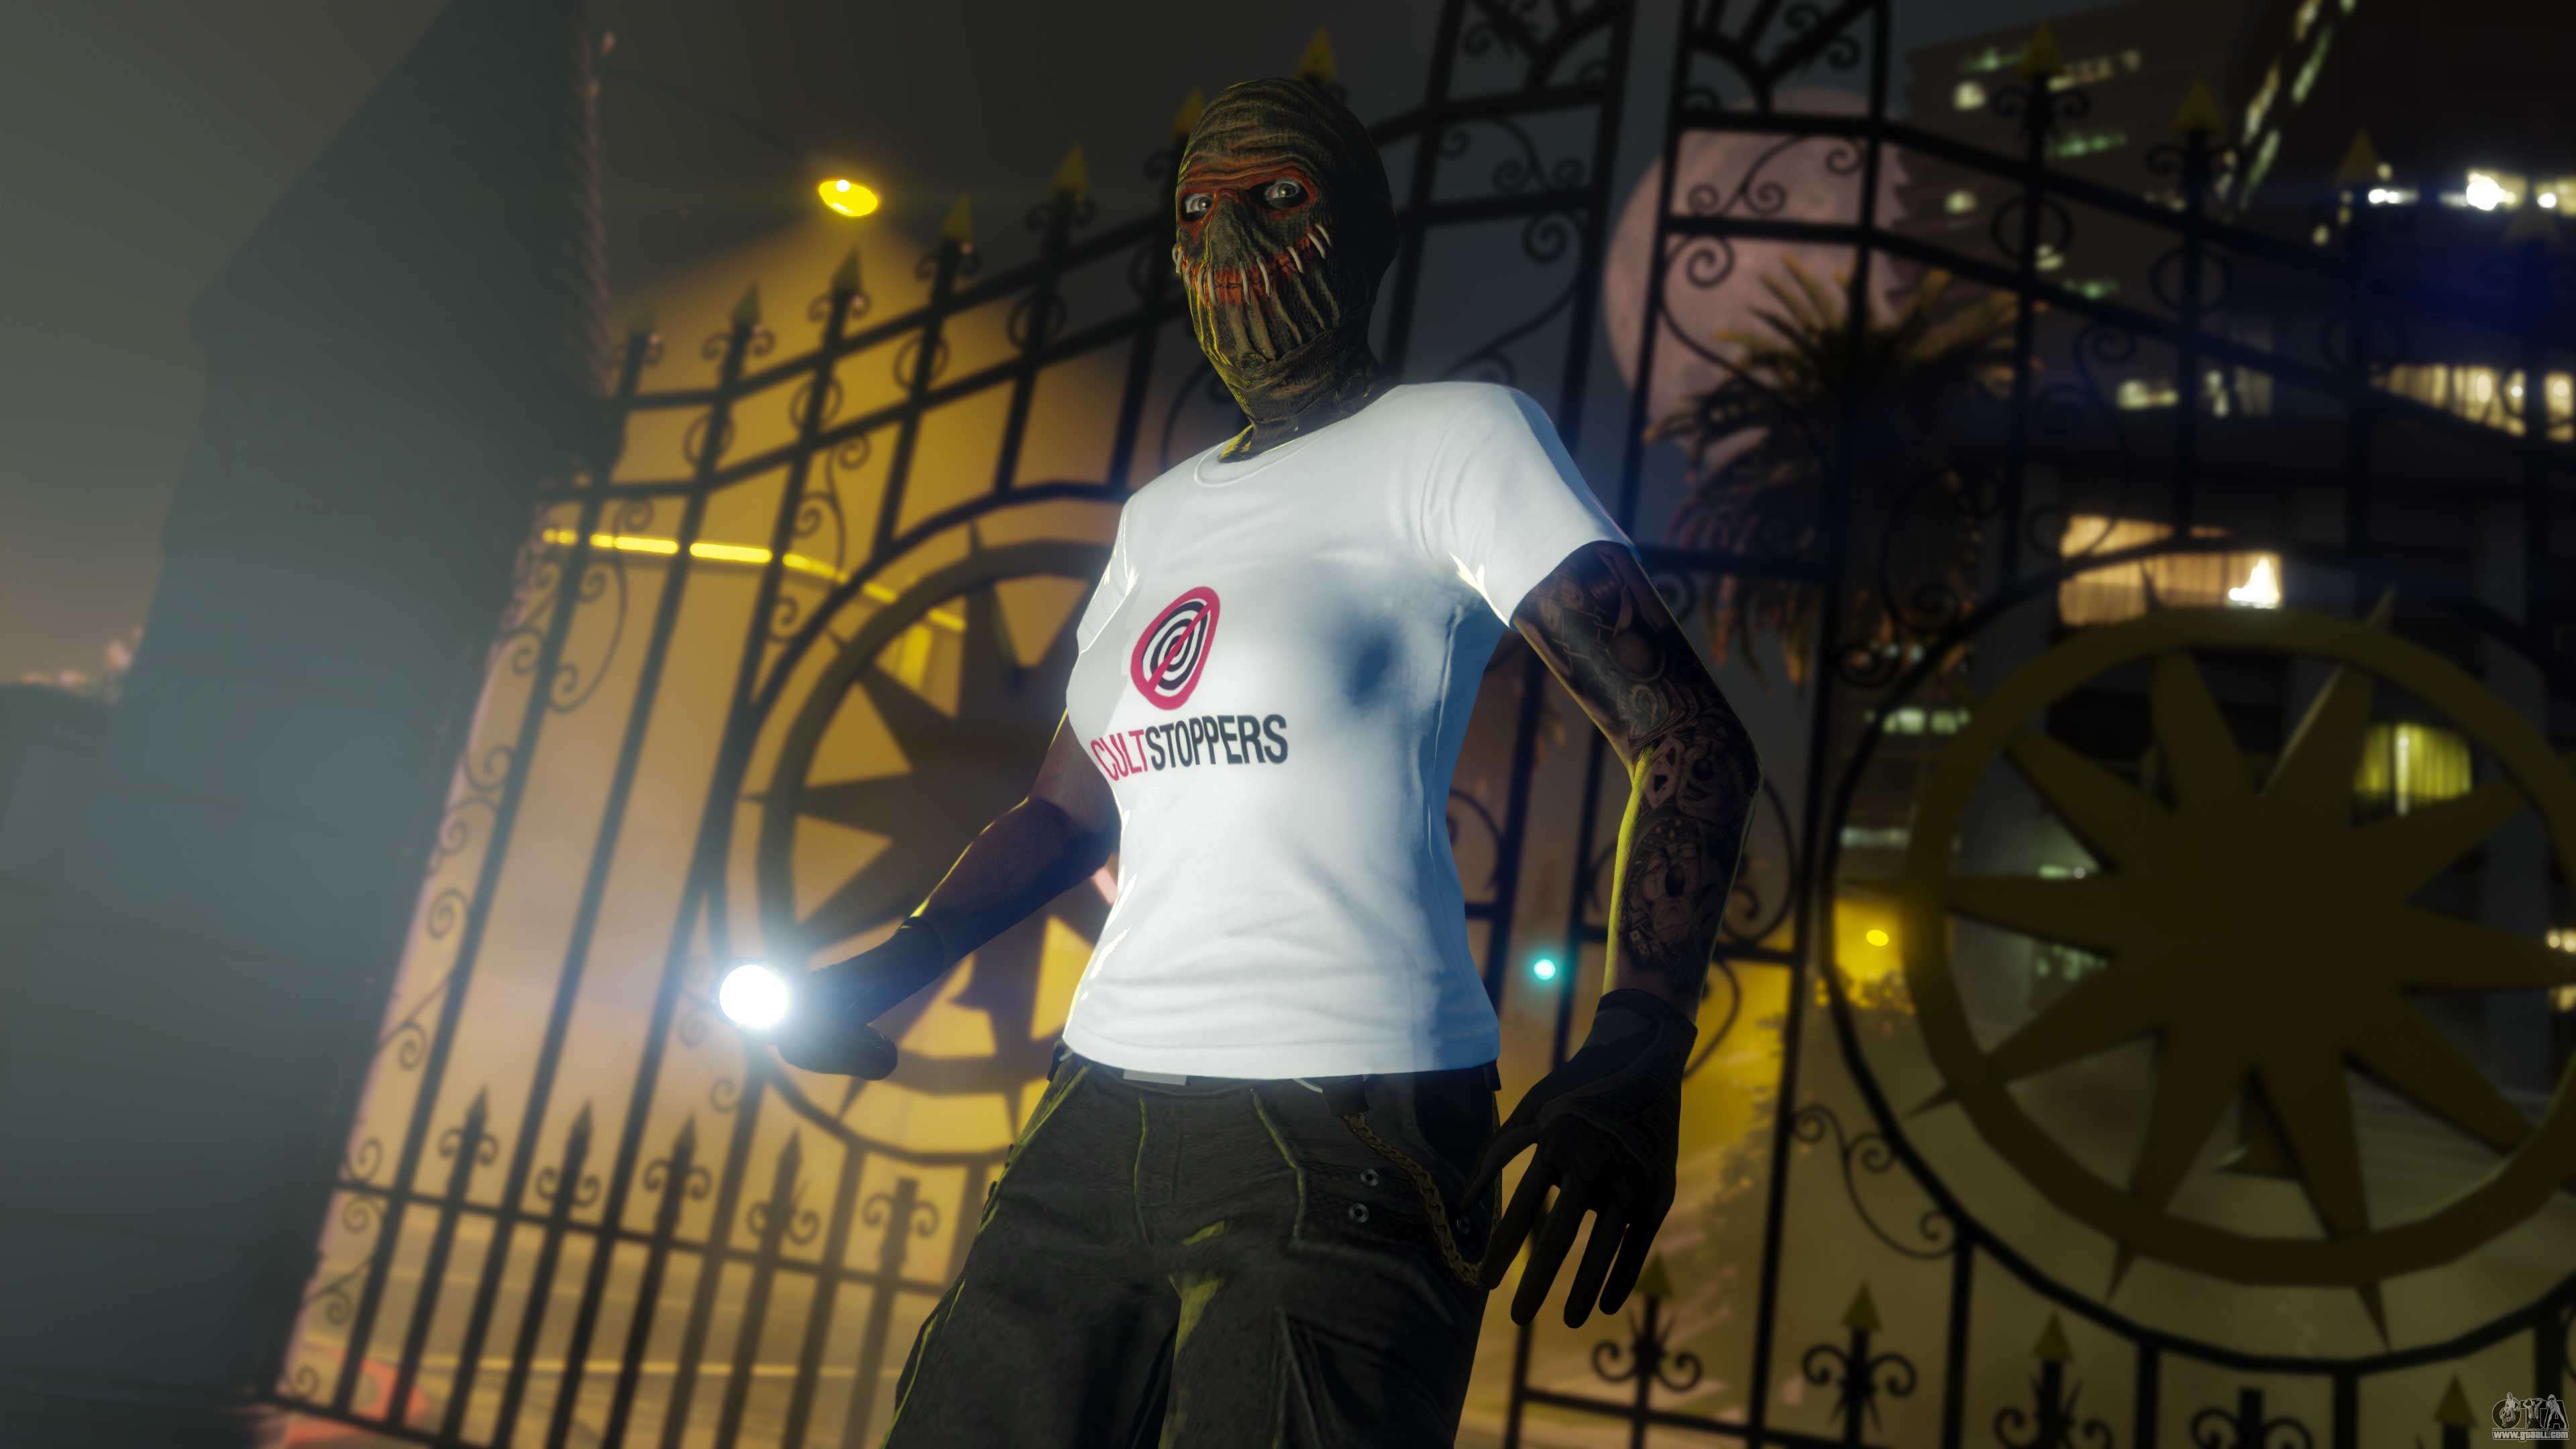 How to play Beast vs. Slasher adversary mode in GTA Online